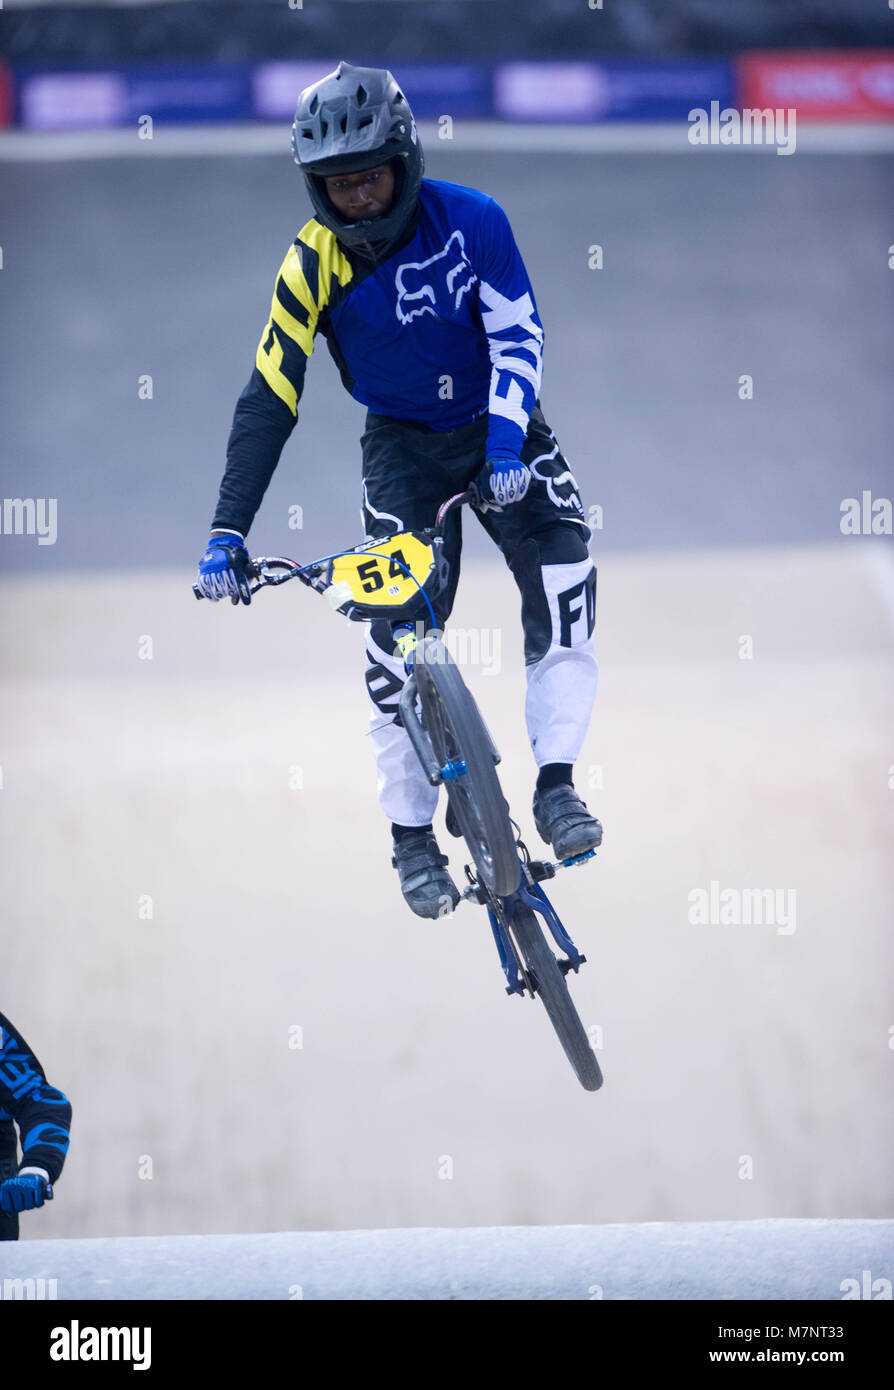 National Cycling Centre, Manchester, UK, 11th March 2018. 54, Lenin Sibanda, Manchester BMX Club, Male 17-24 Class in action from round 2 of the HSBC UK | BMX National Series at the HSBC UK National Cycling Centre. © David Partridge / Alamy Live News Stock Photo